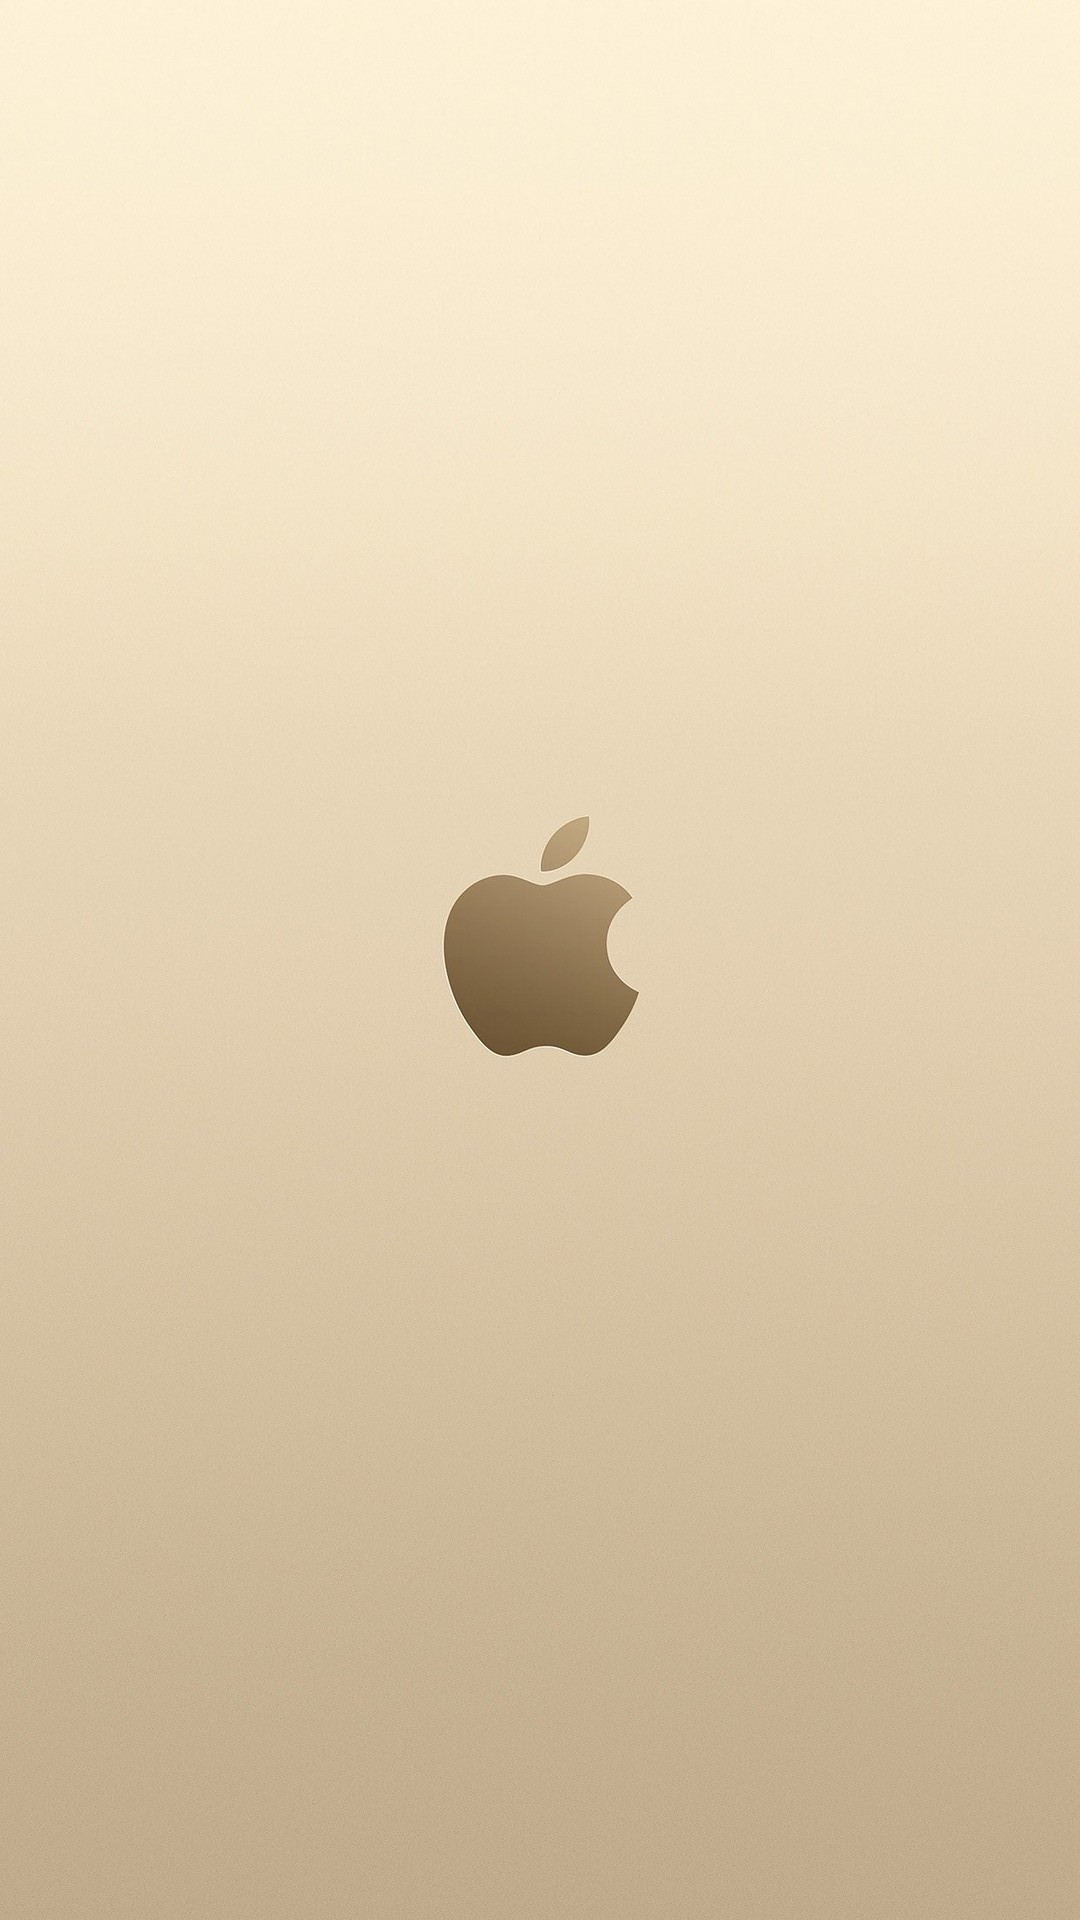 Metallic Gold Wallpaper Android with HD resolution 1080x1920